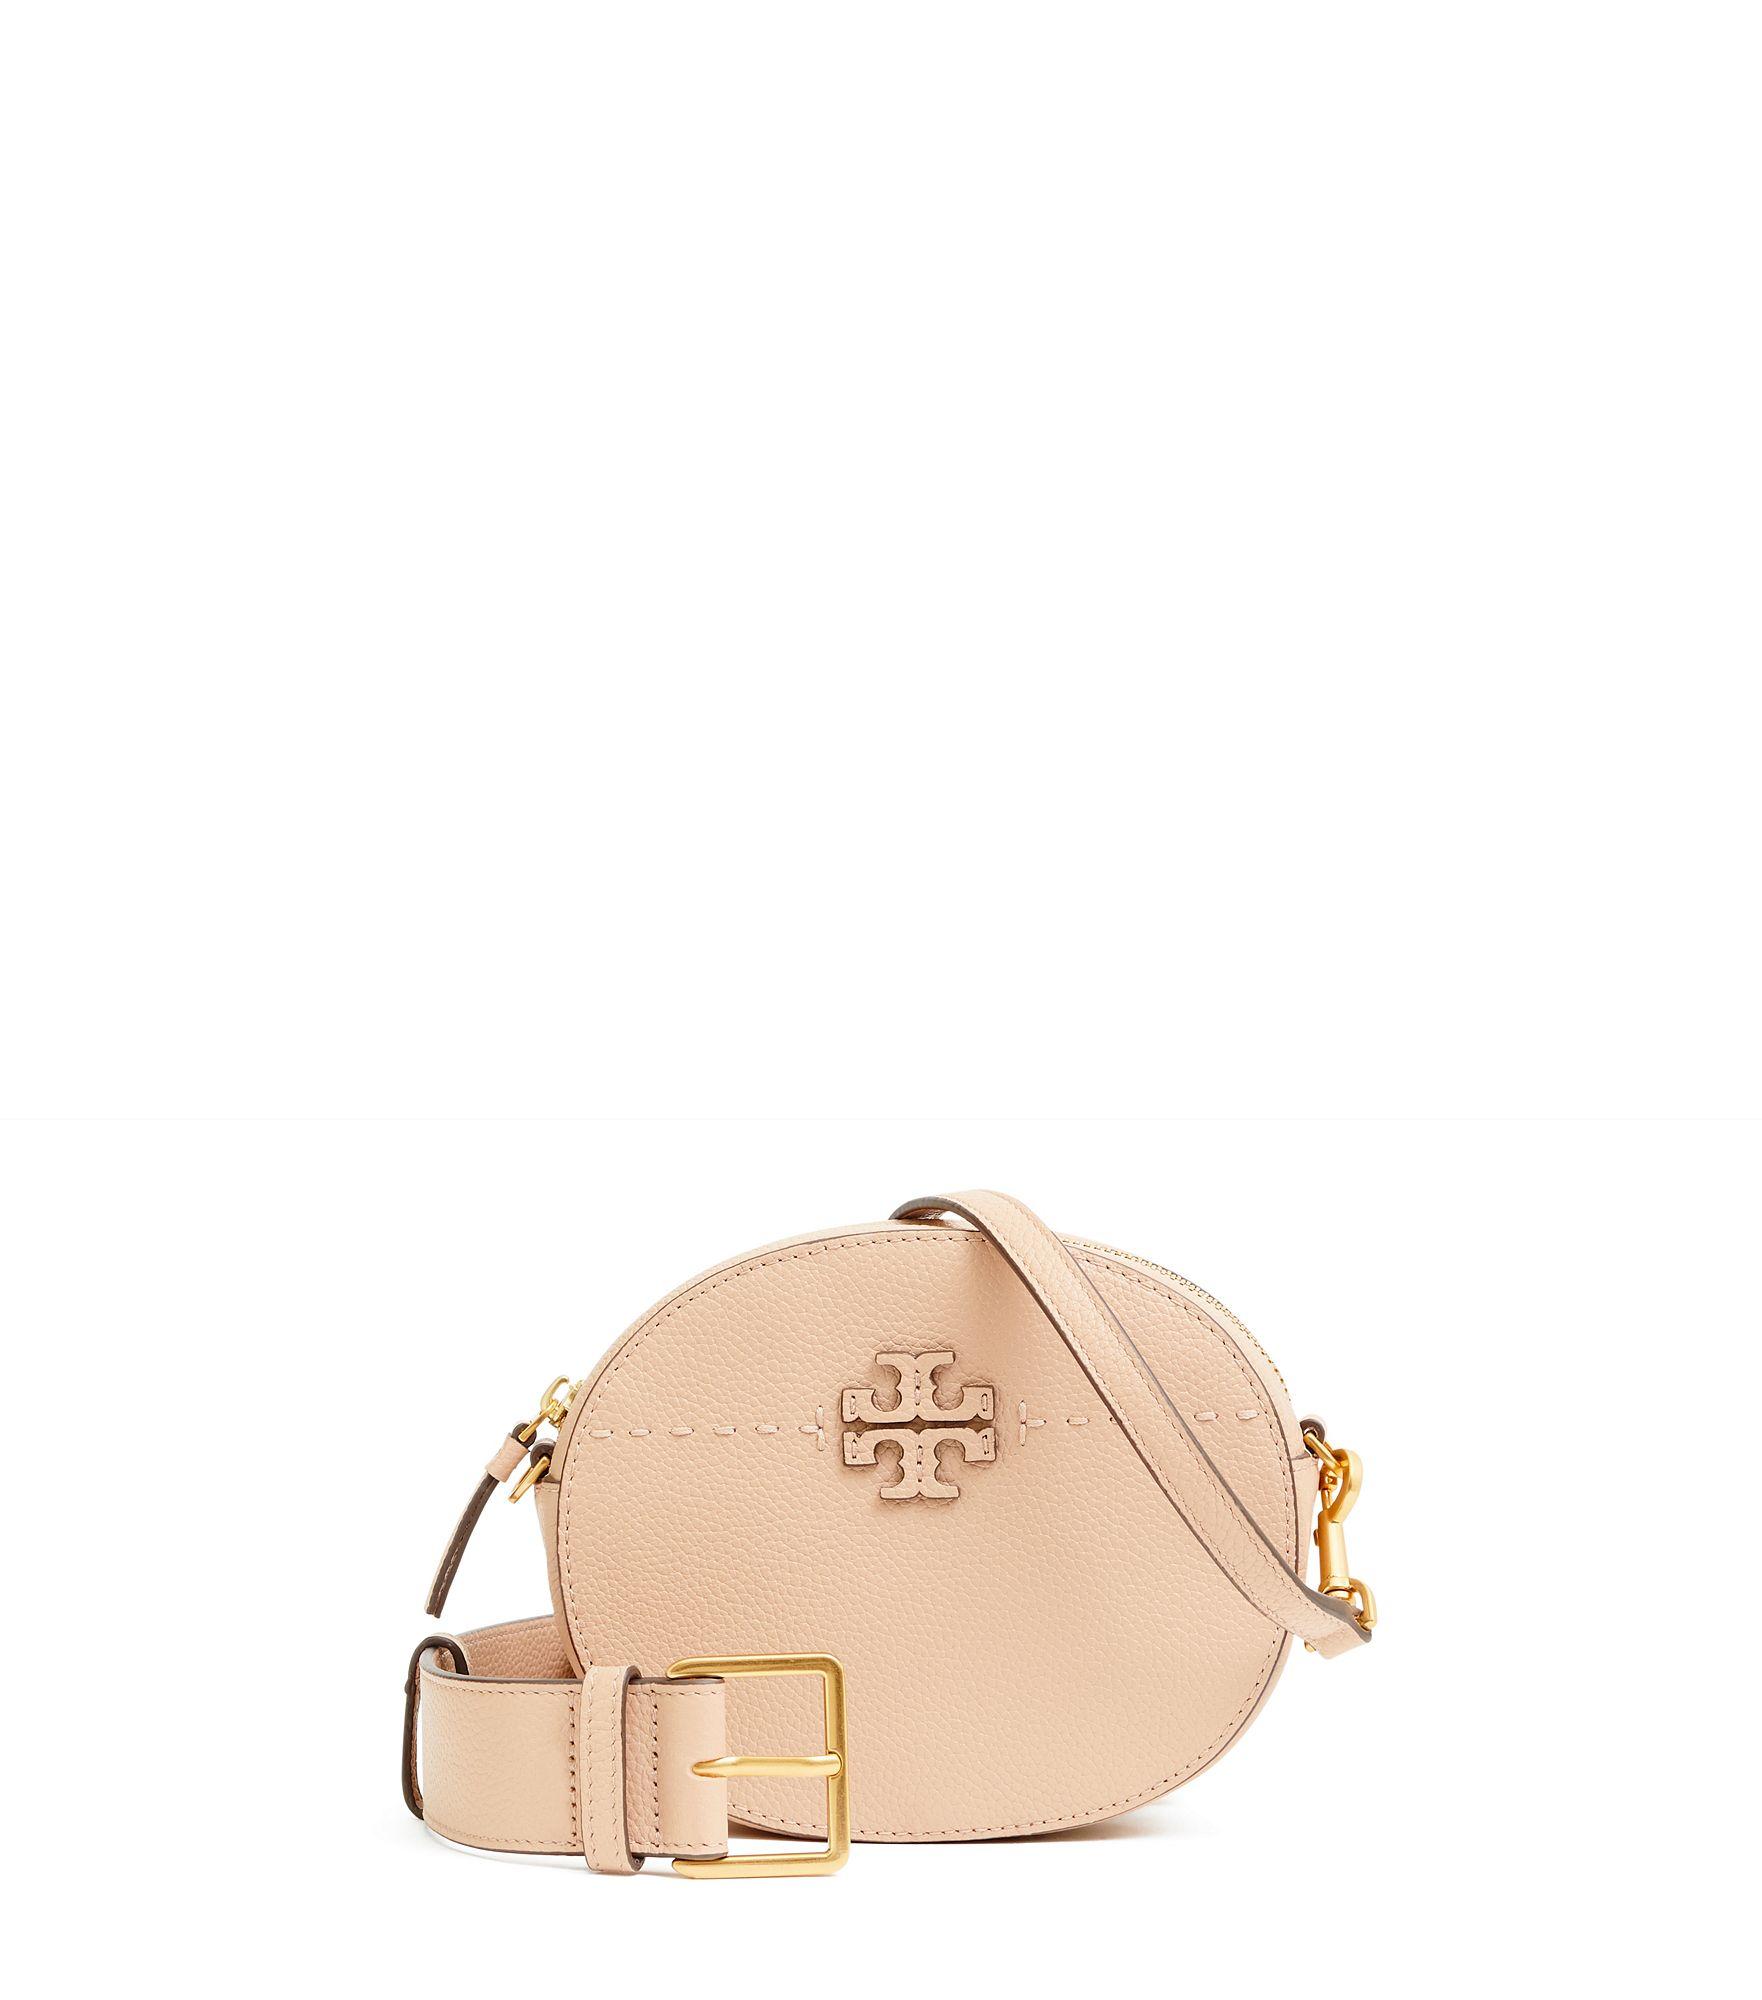 Tory Burch Mcgraw Convertible Round Belt Bag in Natural | Lyst Canada